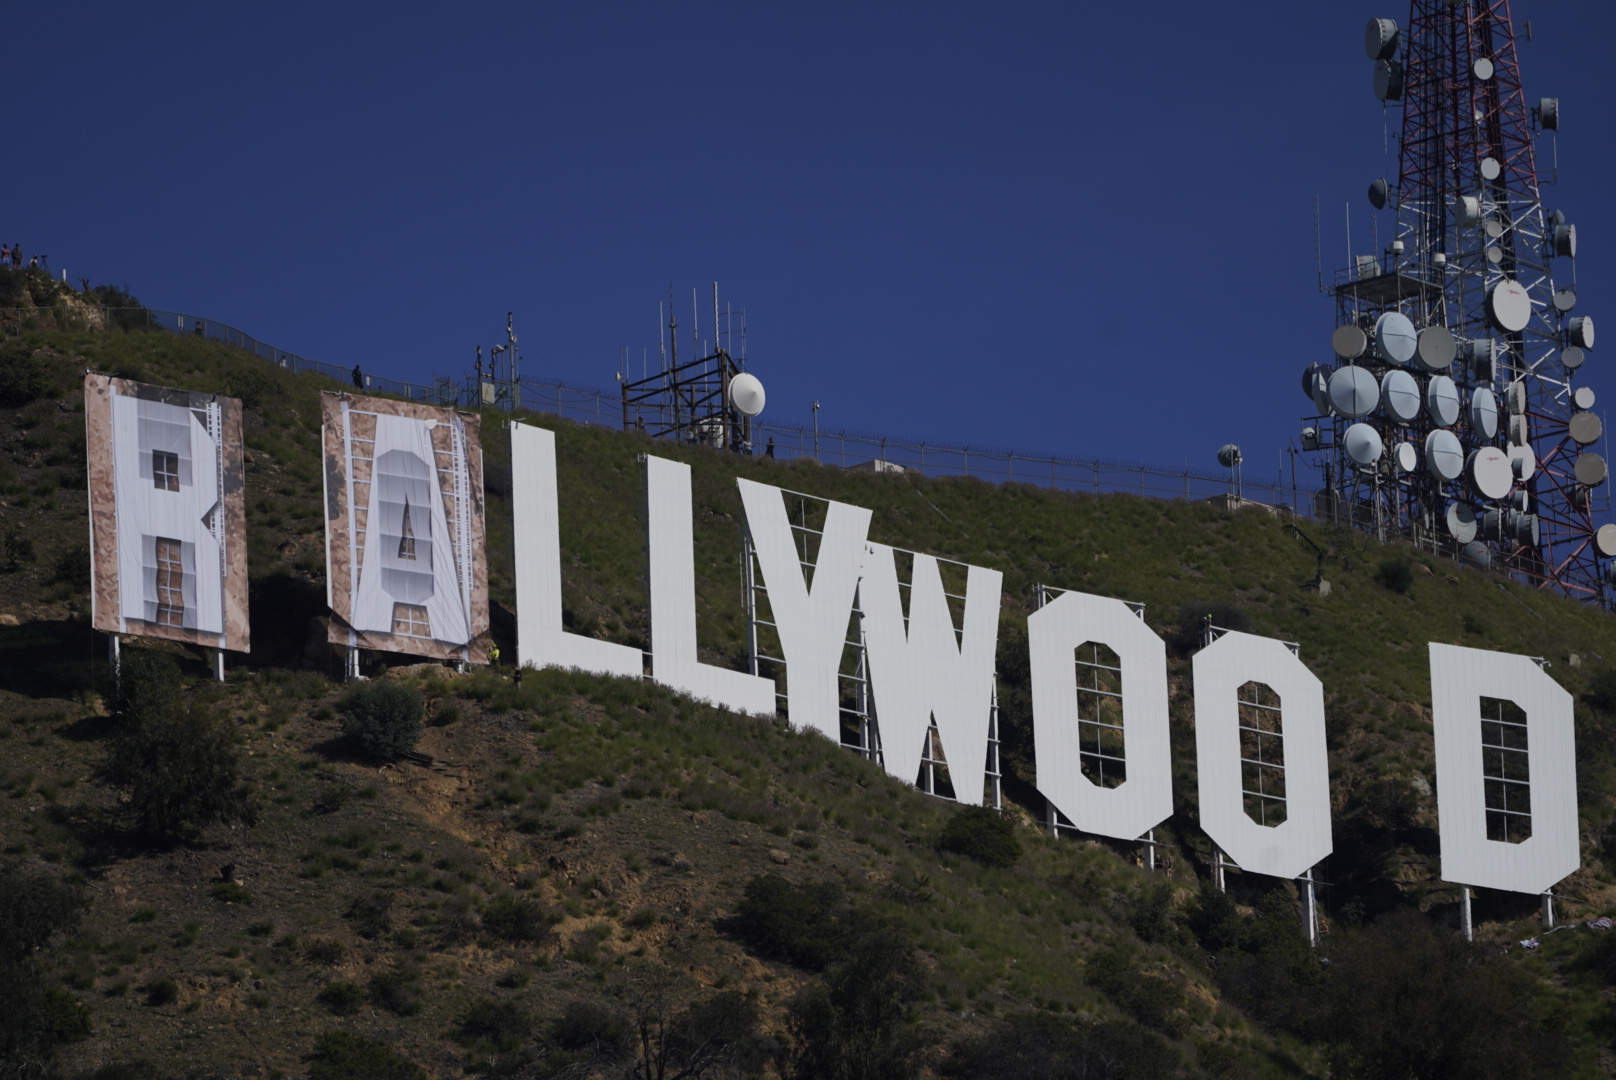 Hollywood turns 100. Here's why it's as fabulous as ever